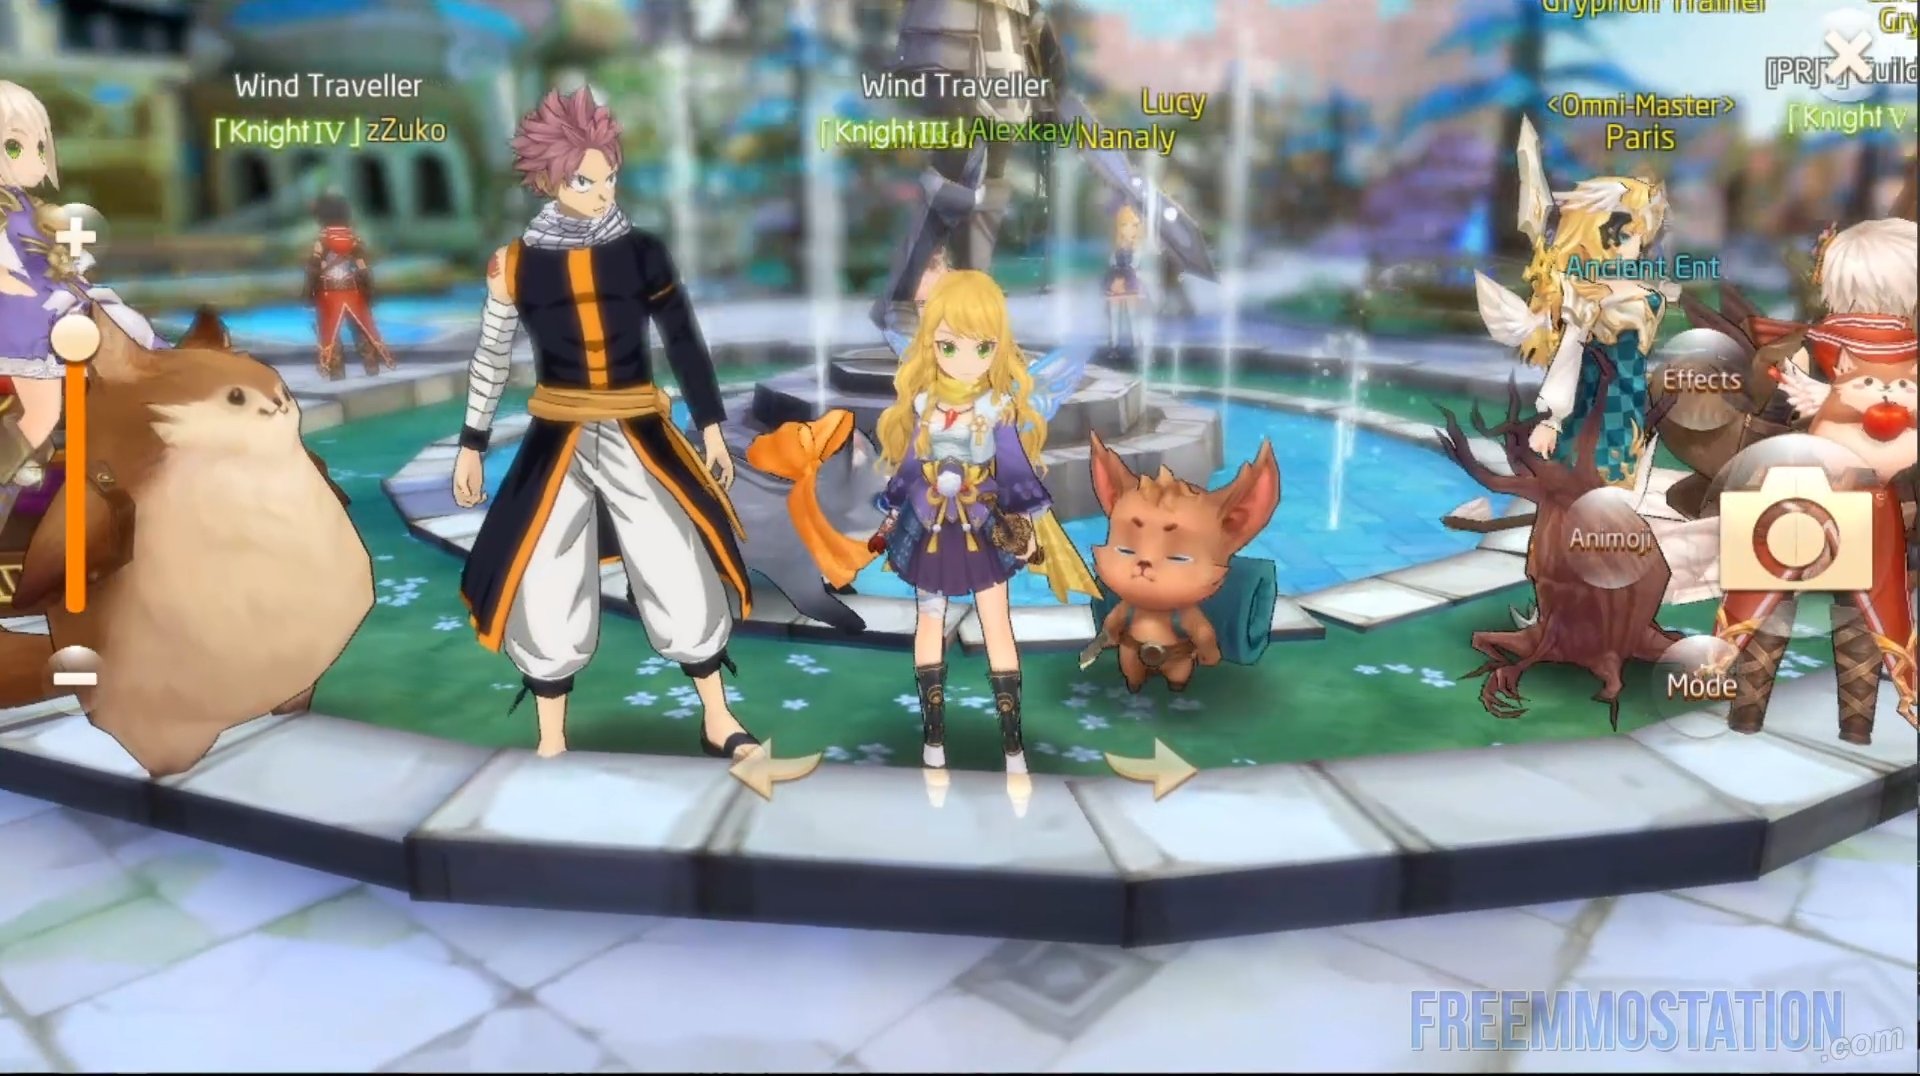 Tales of Wind crossover Fairy Tail Gameplay Impressions PC and Mobile anime   - 00001 - FreeMMOStation